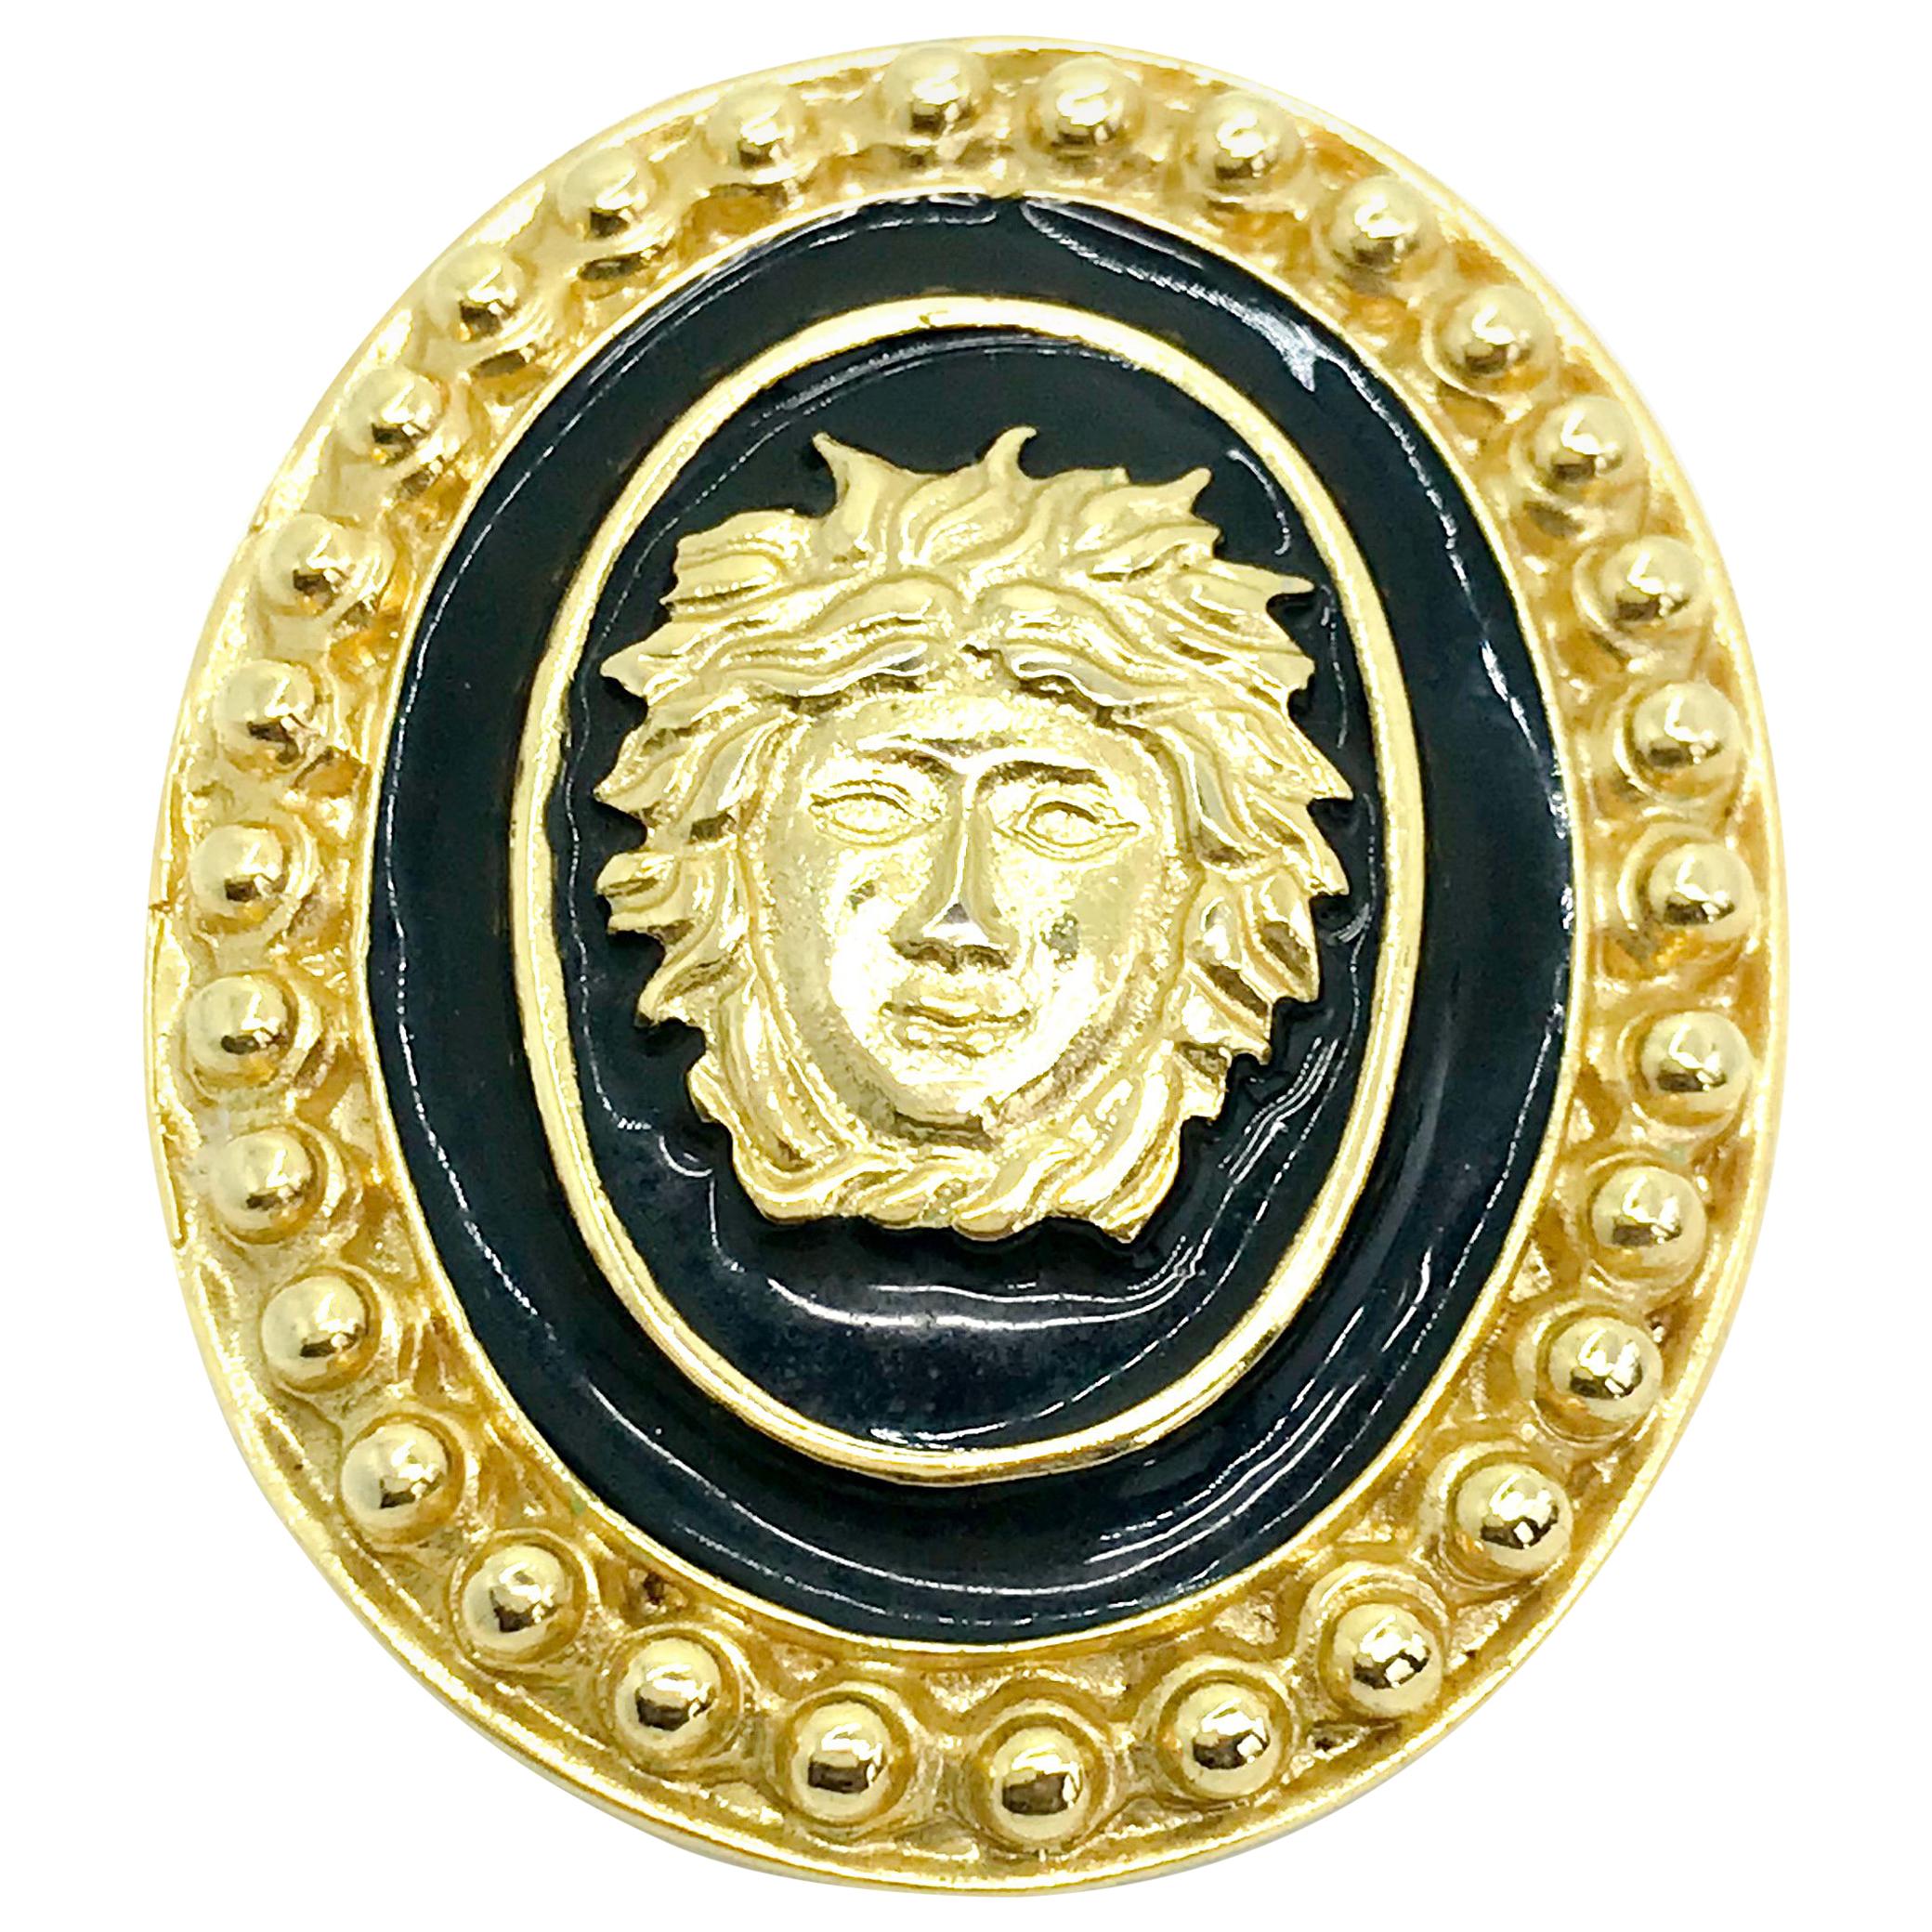 Gianni Versace 1980s Vintage Large Statement Brooch Pin  For Sale